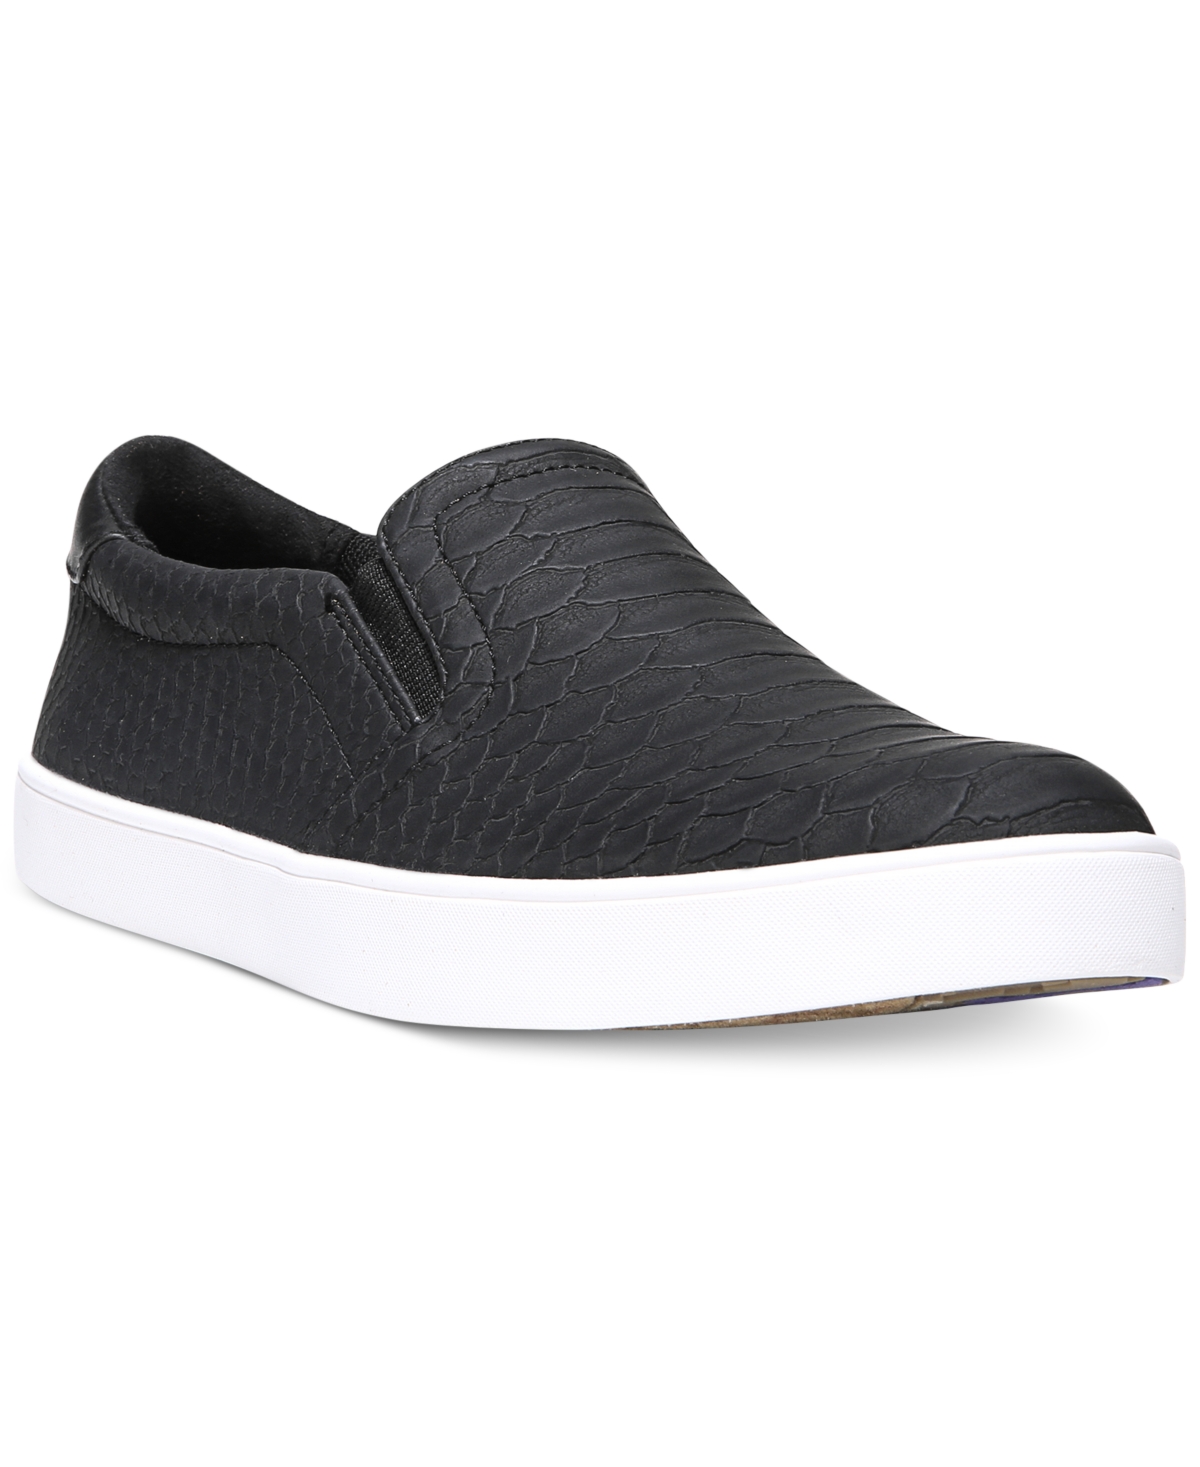 UPC 727679380201 product image for Dr. Scholl's Women's Madison Slip on Sneakers Women's Shoes | upcitemdb.com